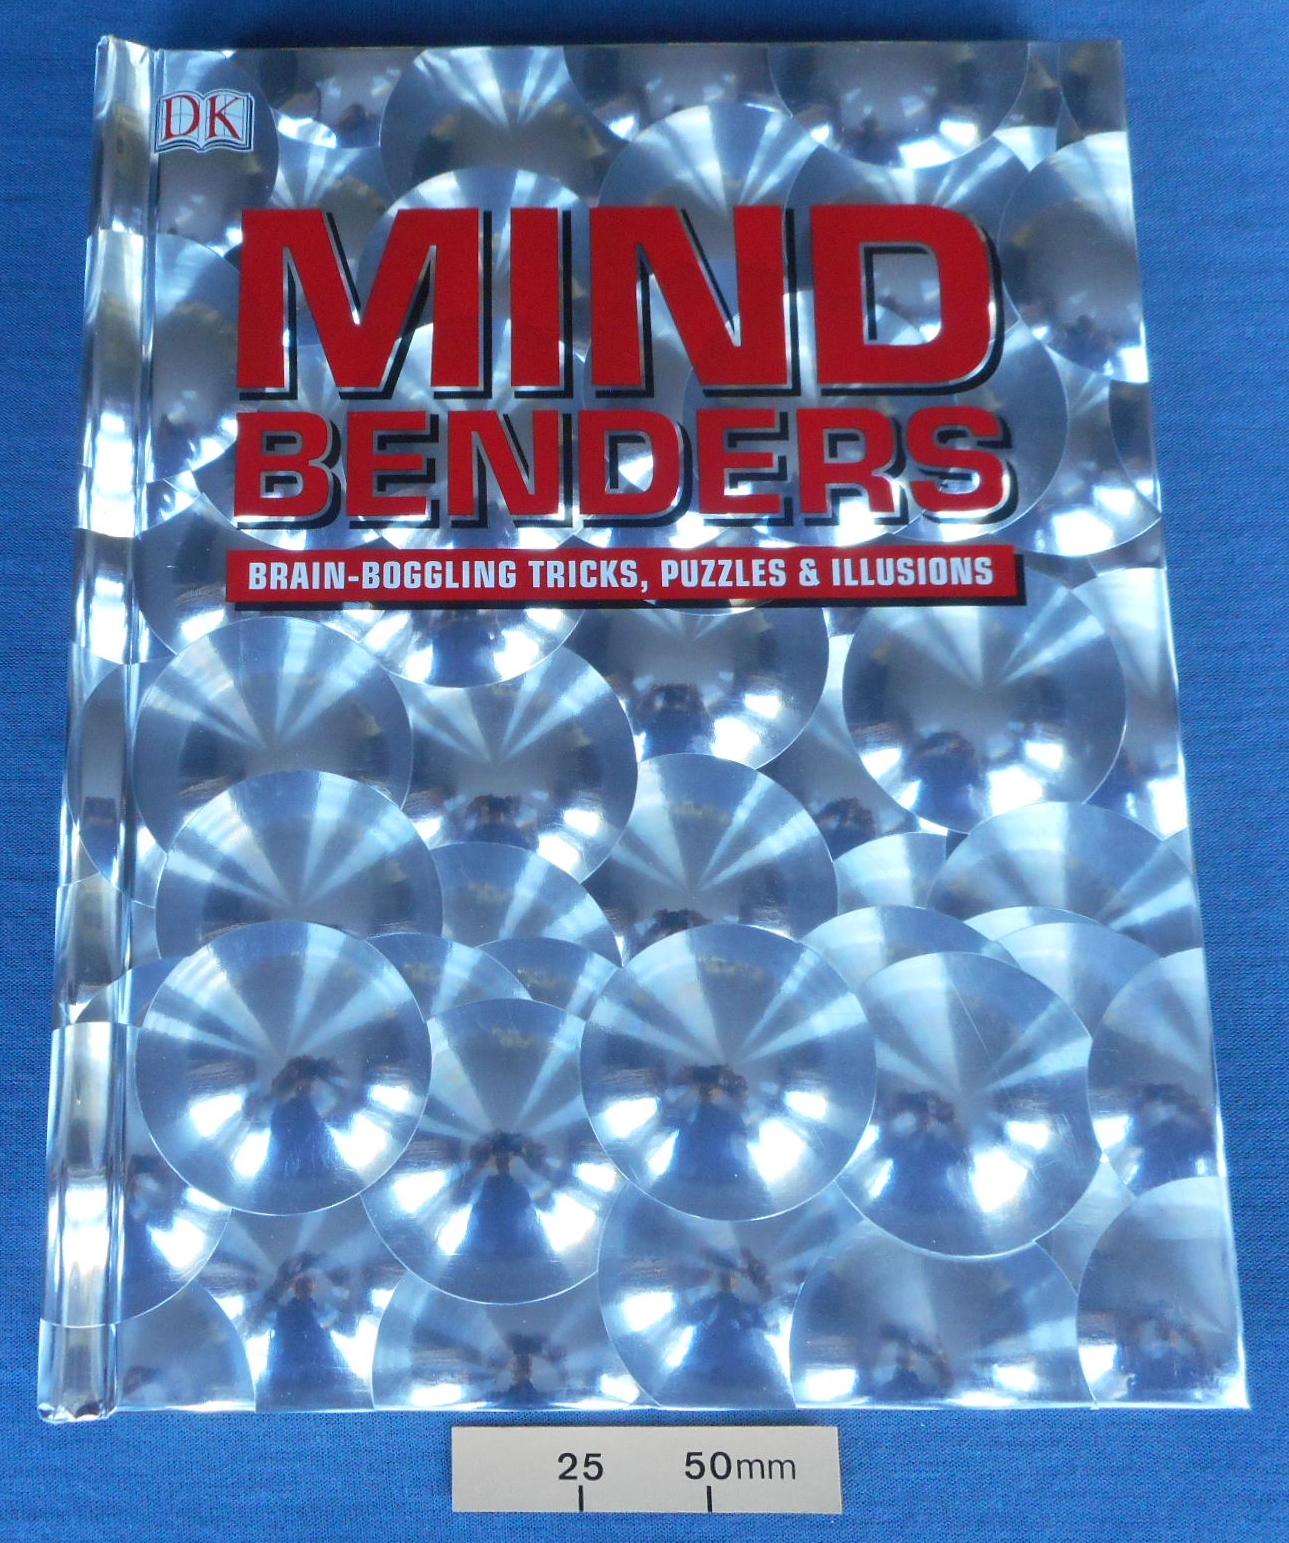 ‘Mind Benders’ – a book of brain-boggling tricks, puzzles and illusions